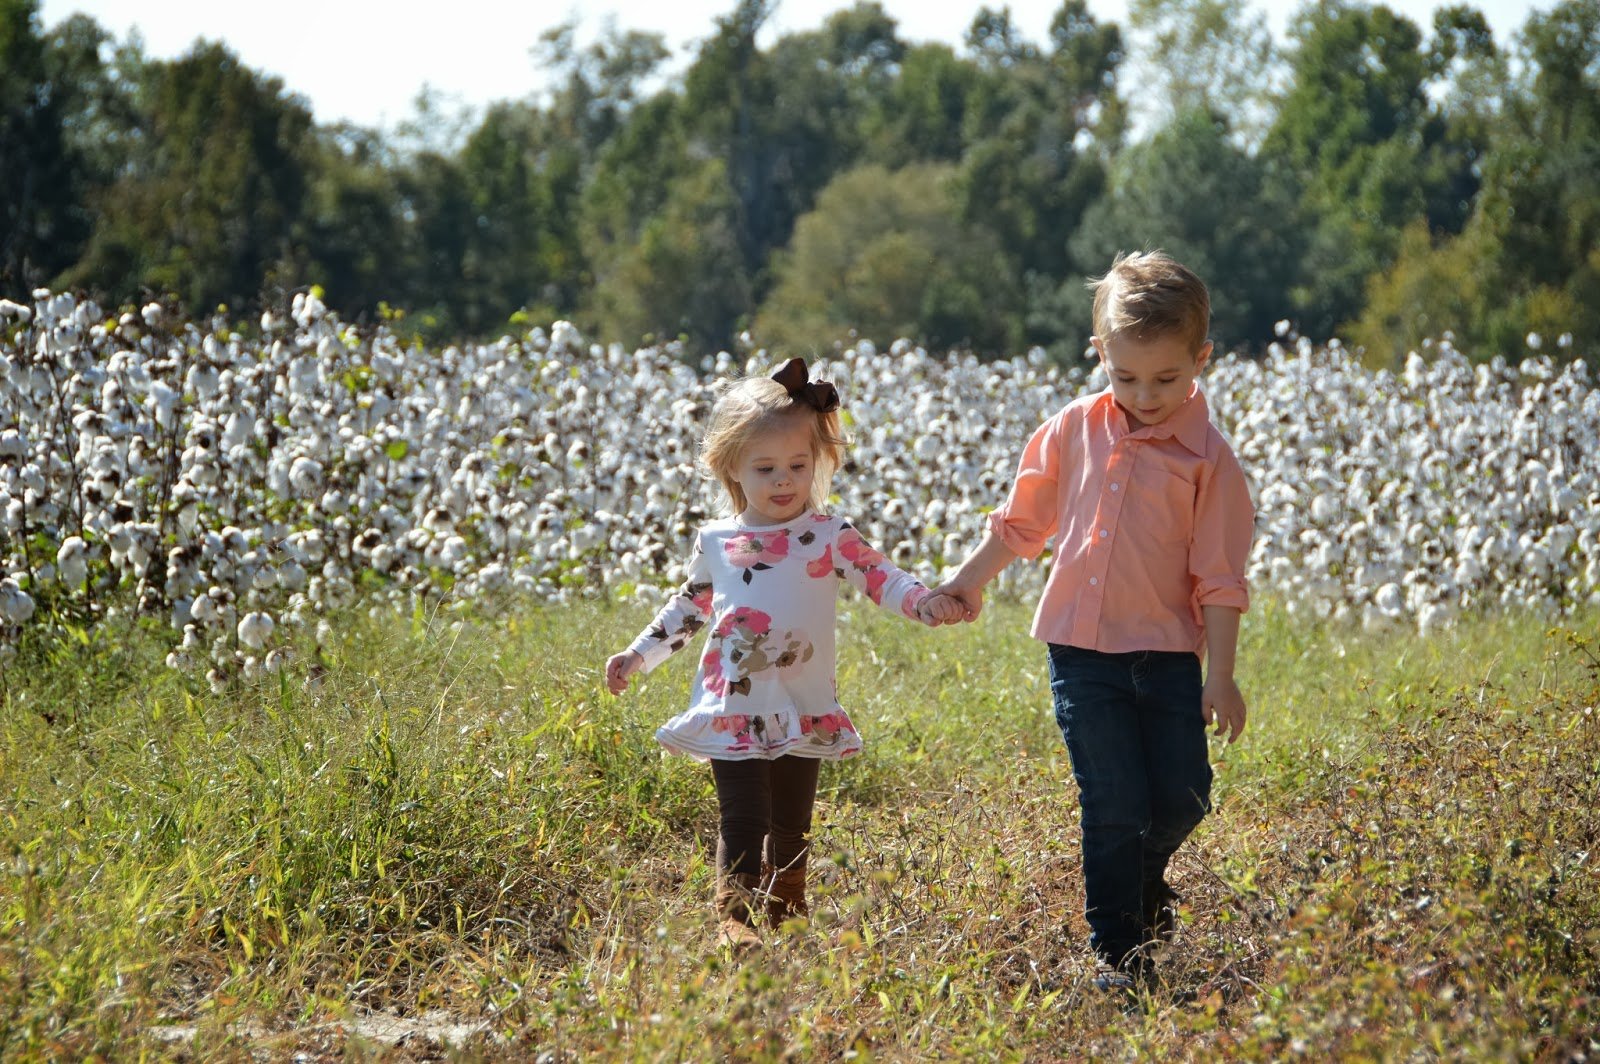 Kids and Cotton